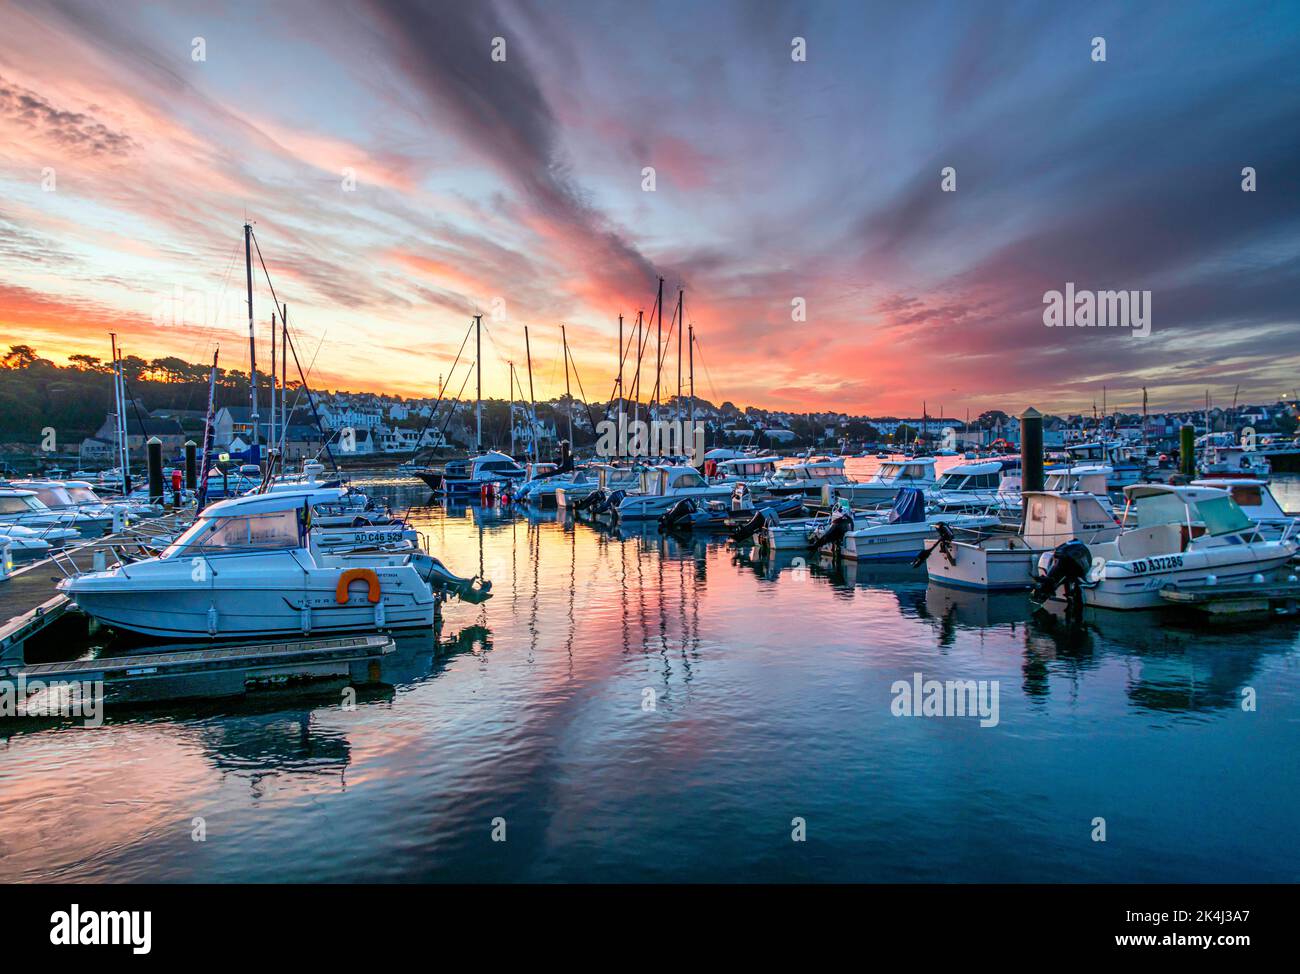 Breathtaking colorful sunrise over the harbor of Audierne, Brittany, France Stock Photo